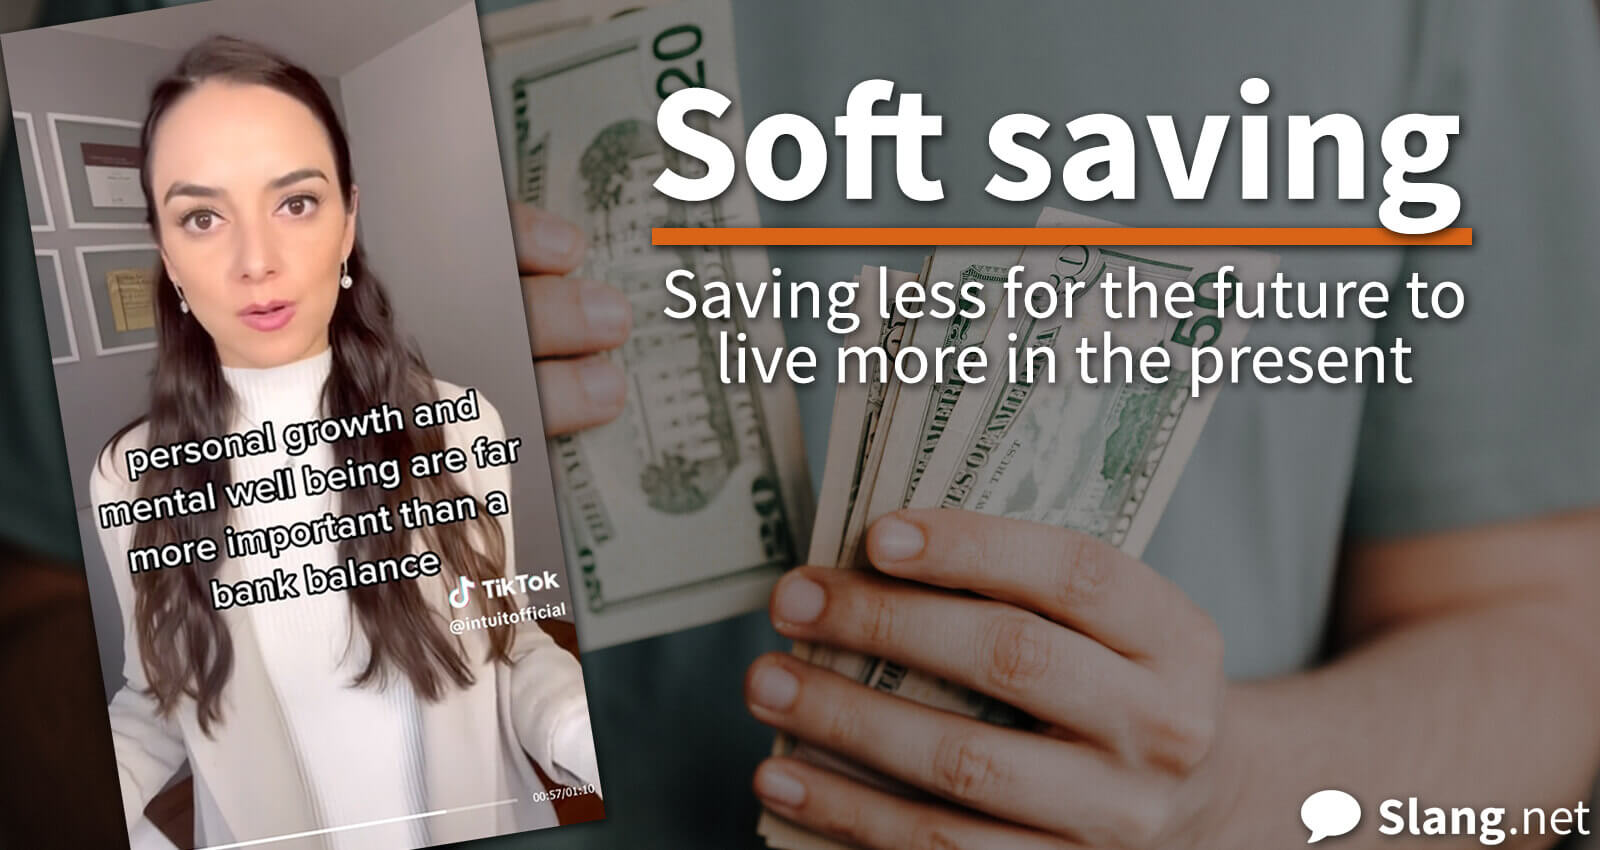 Soft saving is especially common among Gen Zers and became a trend on TikTok